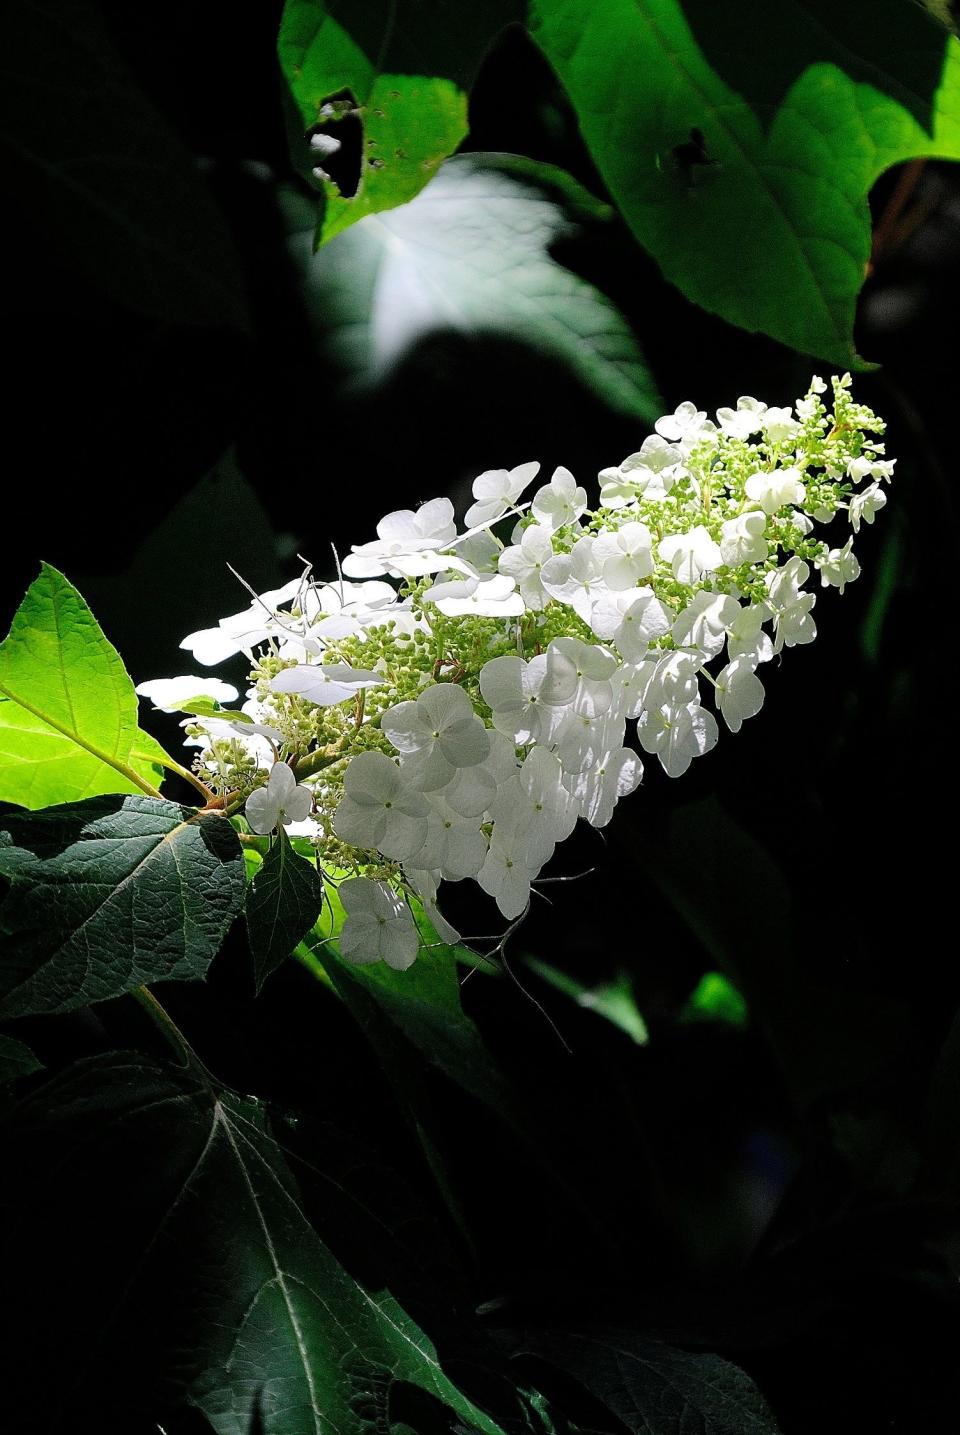 In the landscape hydrangeas rule like royalty varieties of native oakleaf like Gatsby Gal, Gatsby Moon and are always guaranteed to catch your attention even on a moonlit night.